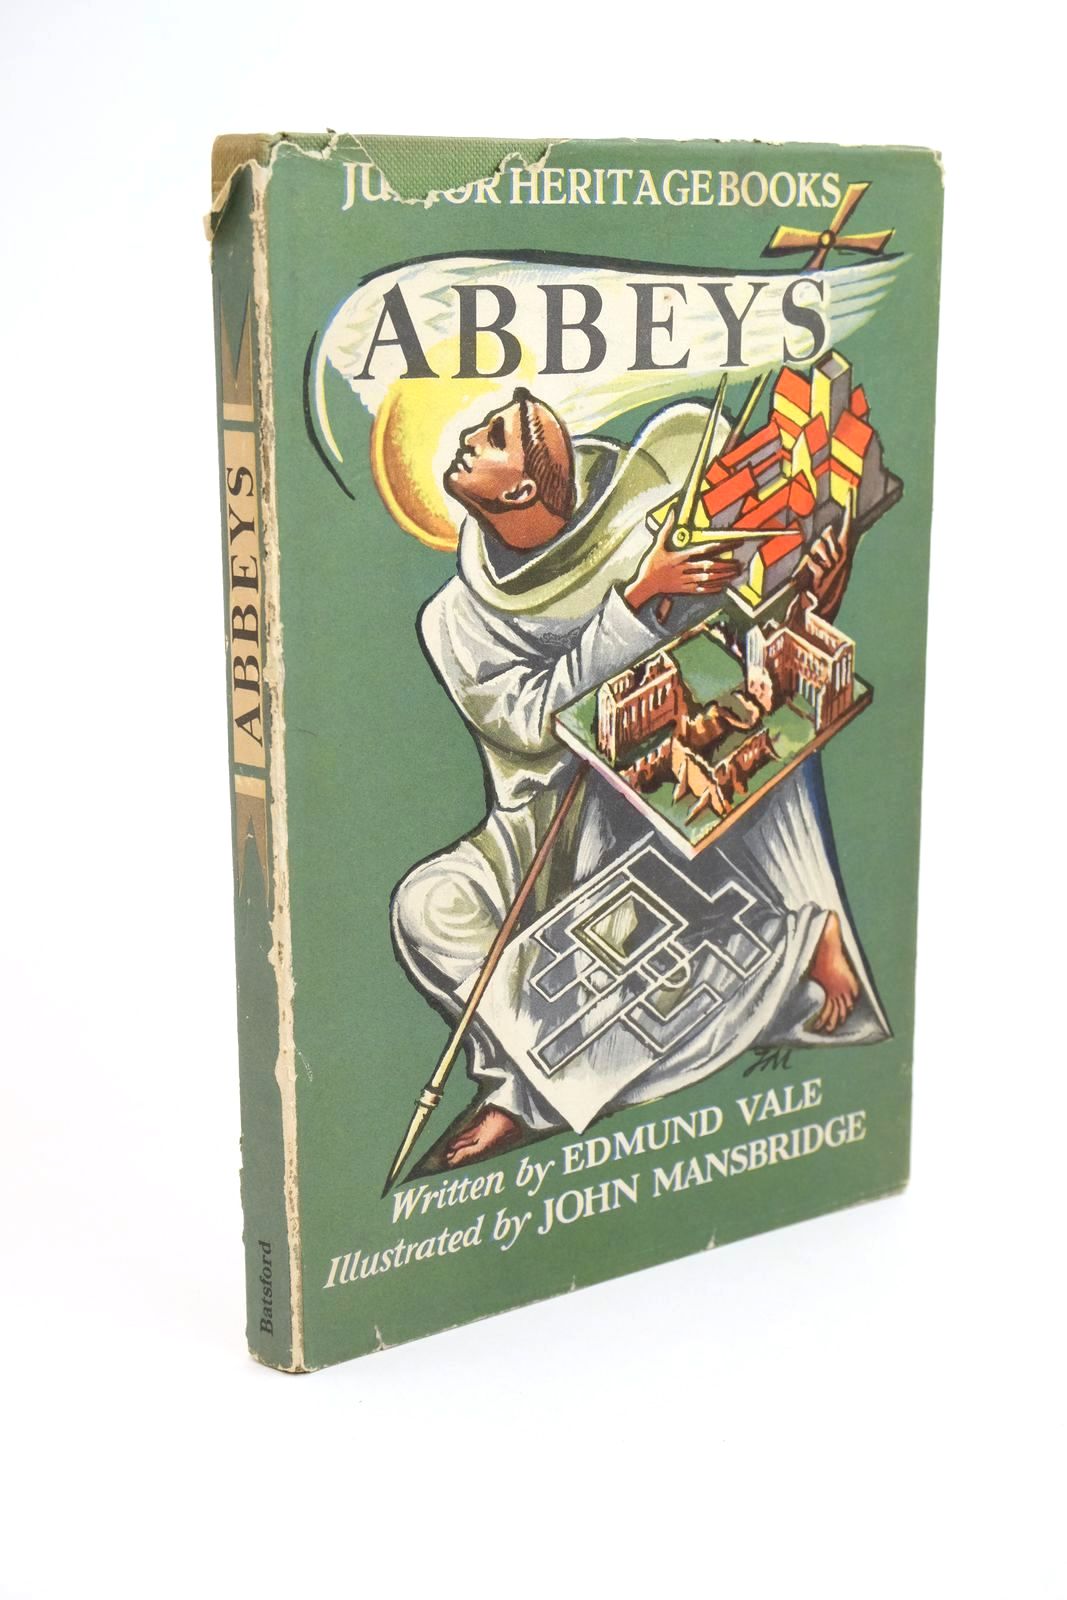 Photo of ABBEYS AND PRIORIES written by Vale, Edmund illustrated by Mansbridge, John published by B.T. Batsford Ltd. (STOCK CODE: 1323246)  for sale by Stella & Rose's Books